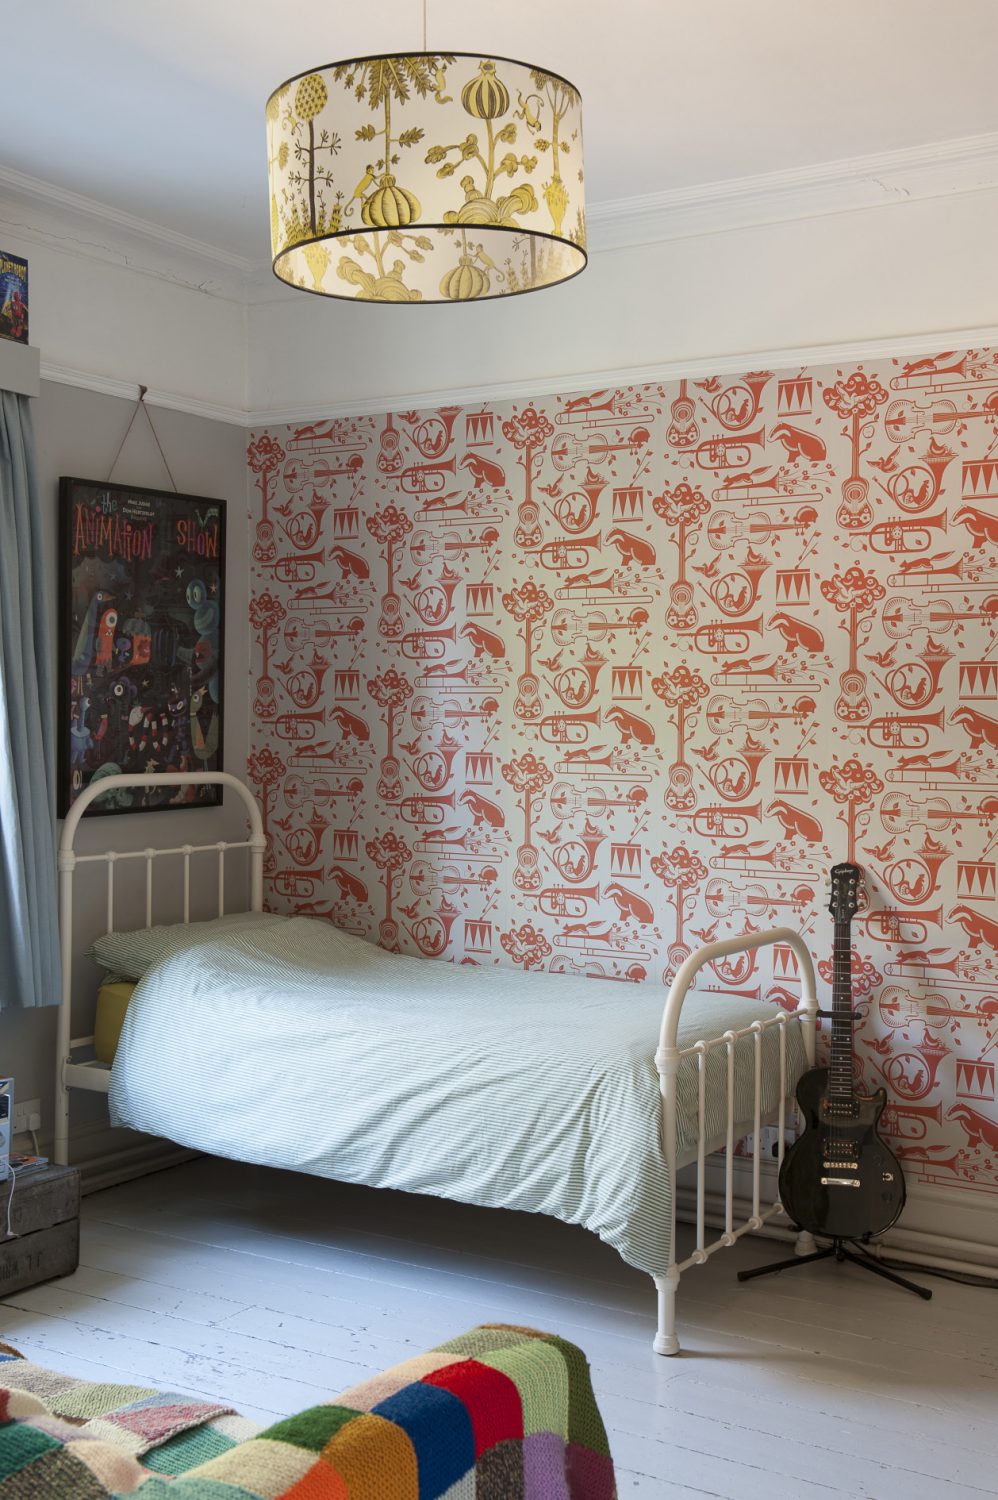 the Mini Moderns wallpaper that features an eccentric mix of French horns, drums, cockerels and badgers